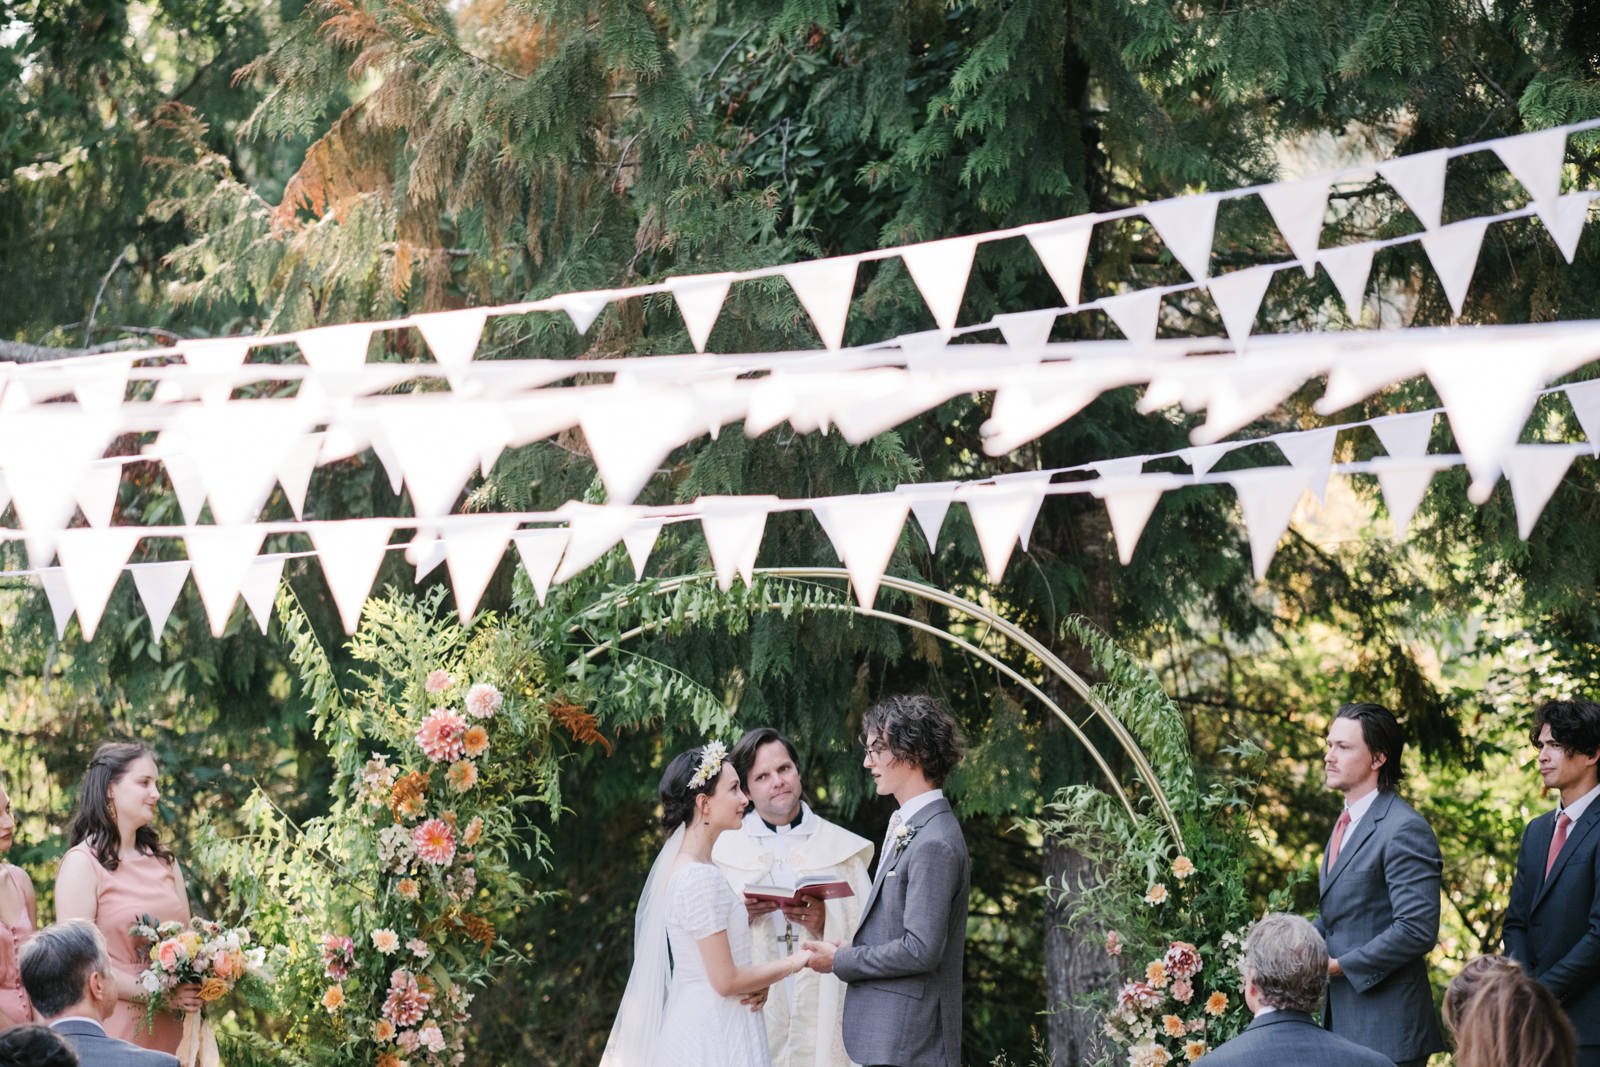  Bride and groom share vows in front of floral arch with white triangle flags above them 